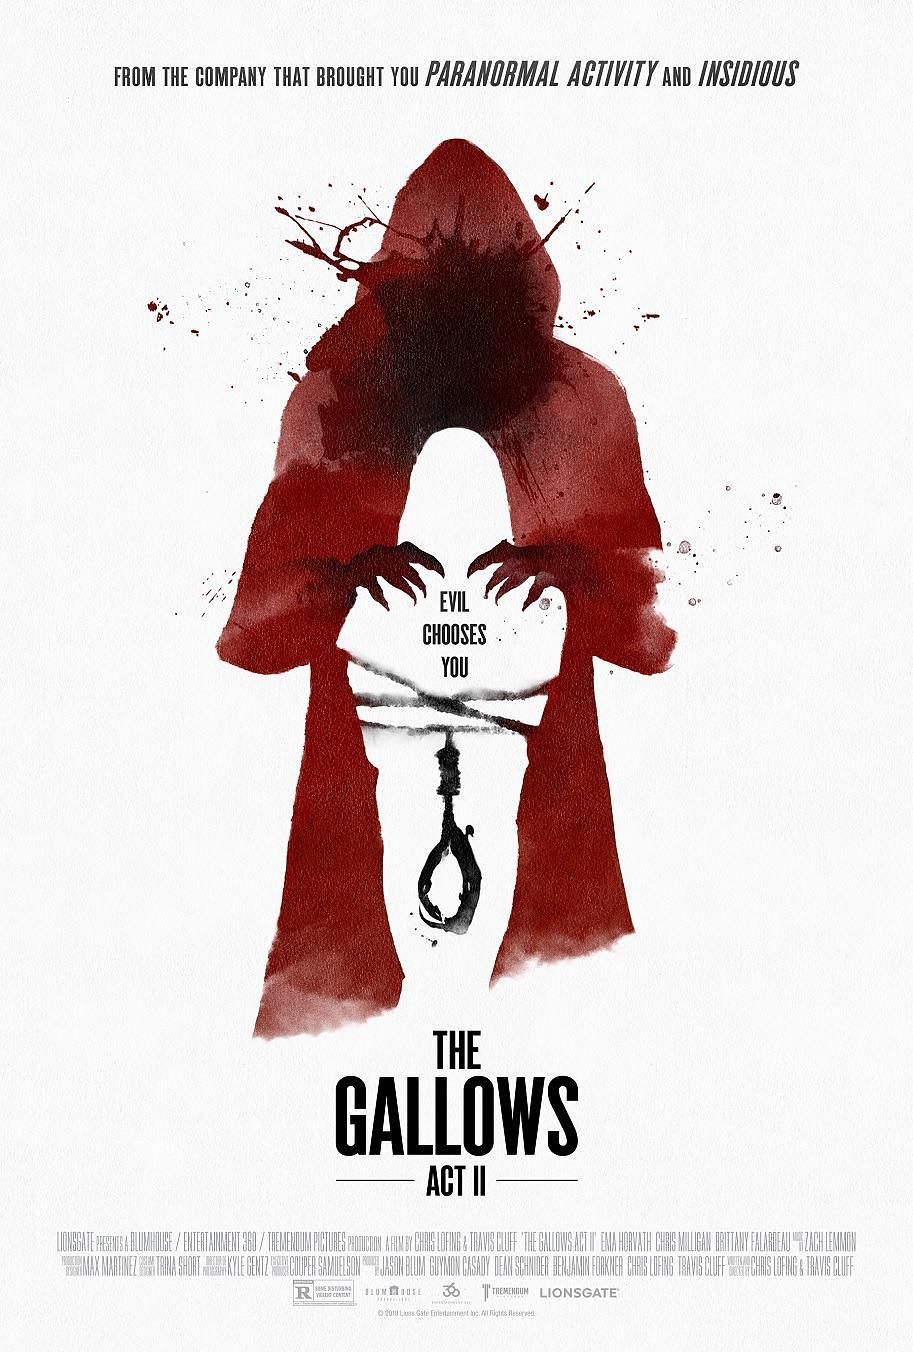 ̼2: The.Gallows.Act.II.2019.1080p.BluRay.REMUX.AVC.DTS-HD.MA.5.1-FGT 26.95-1.png